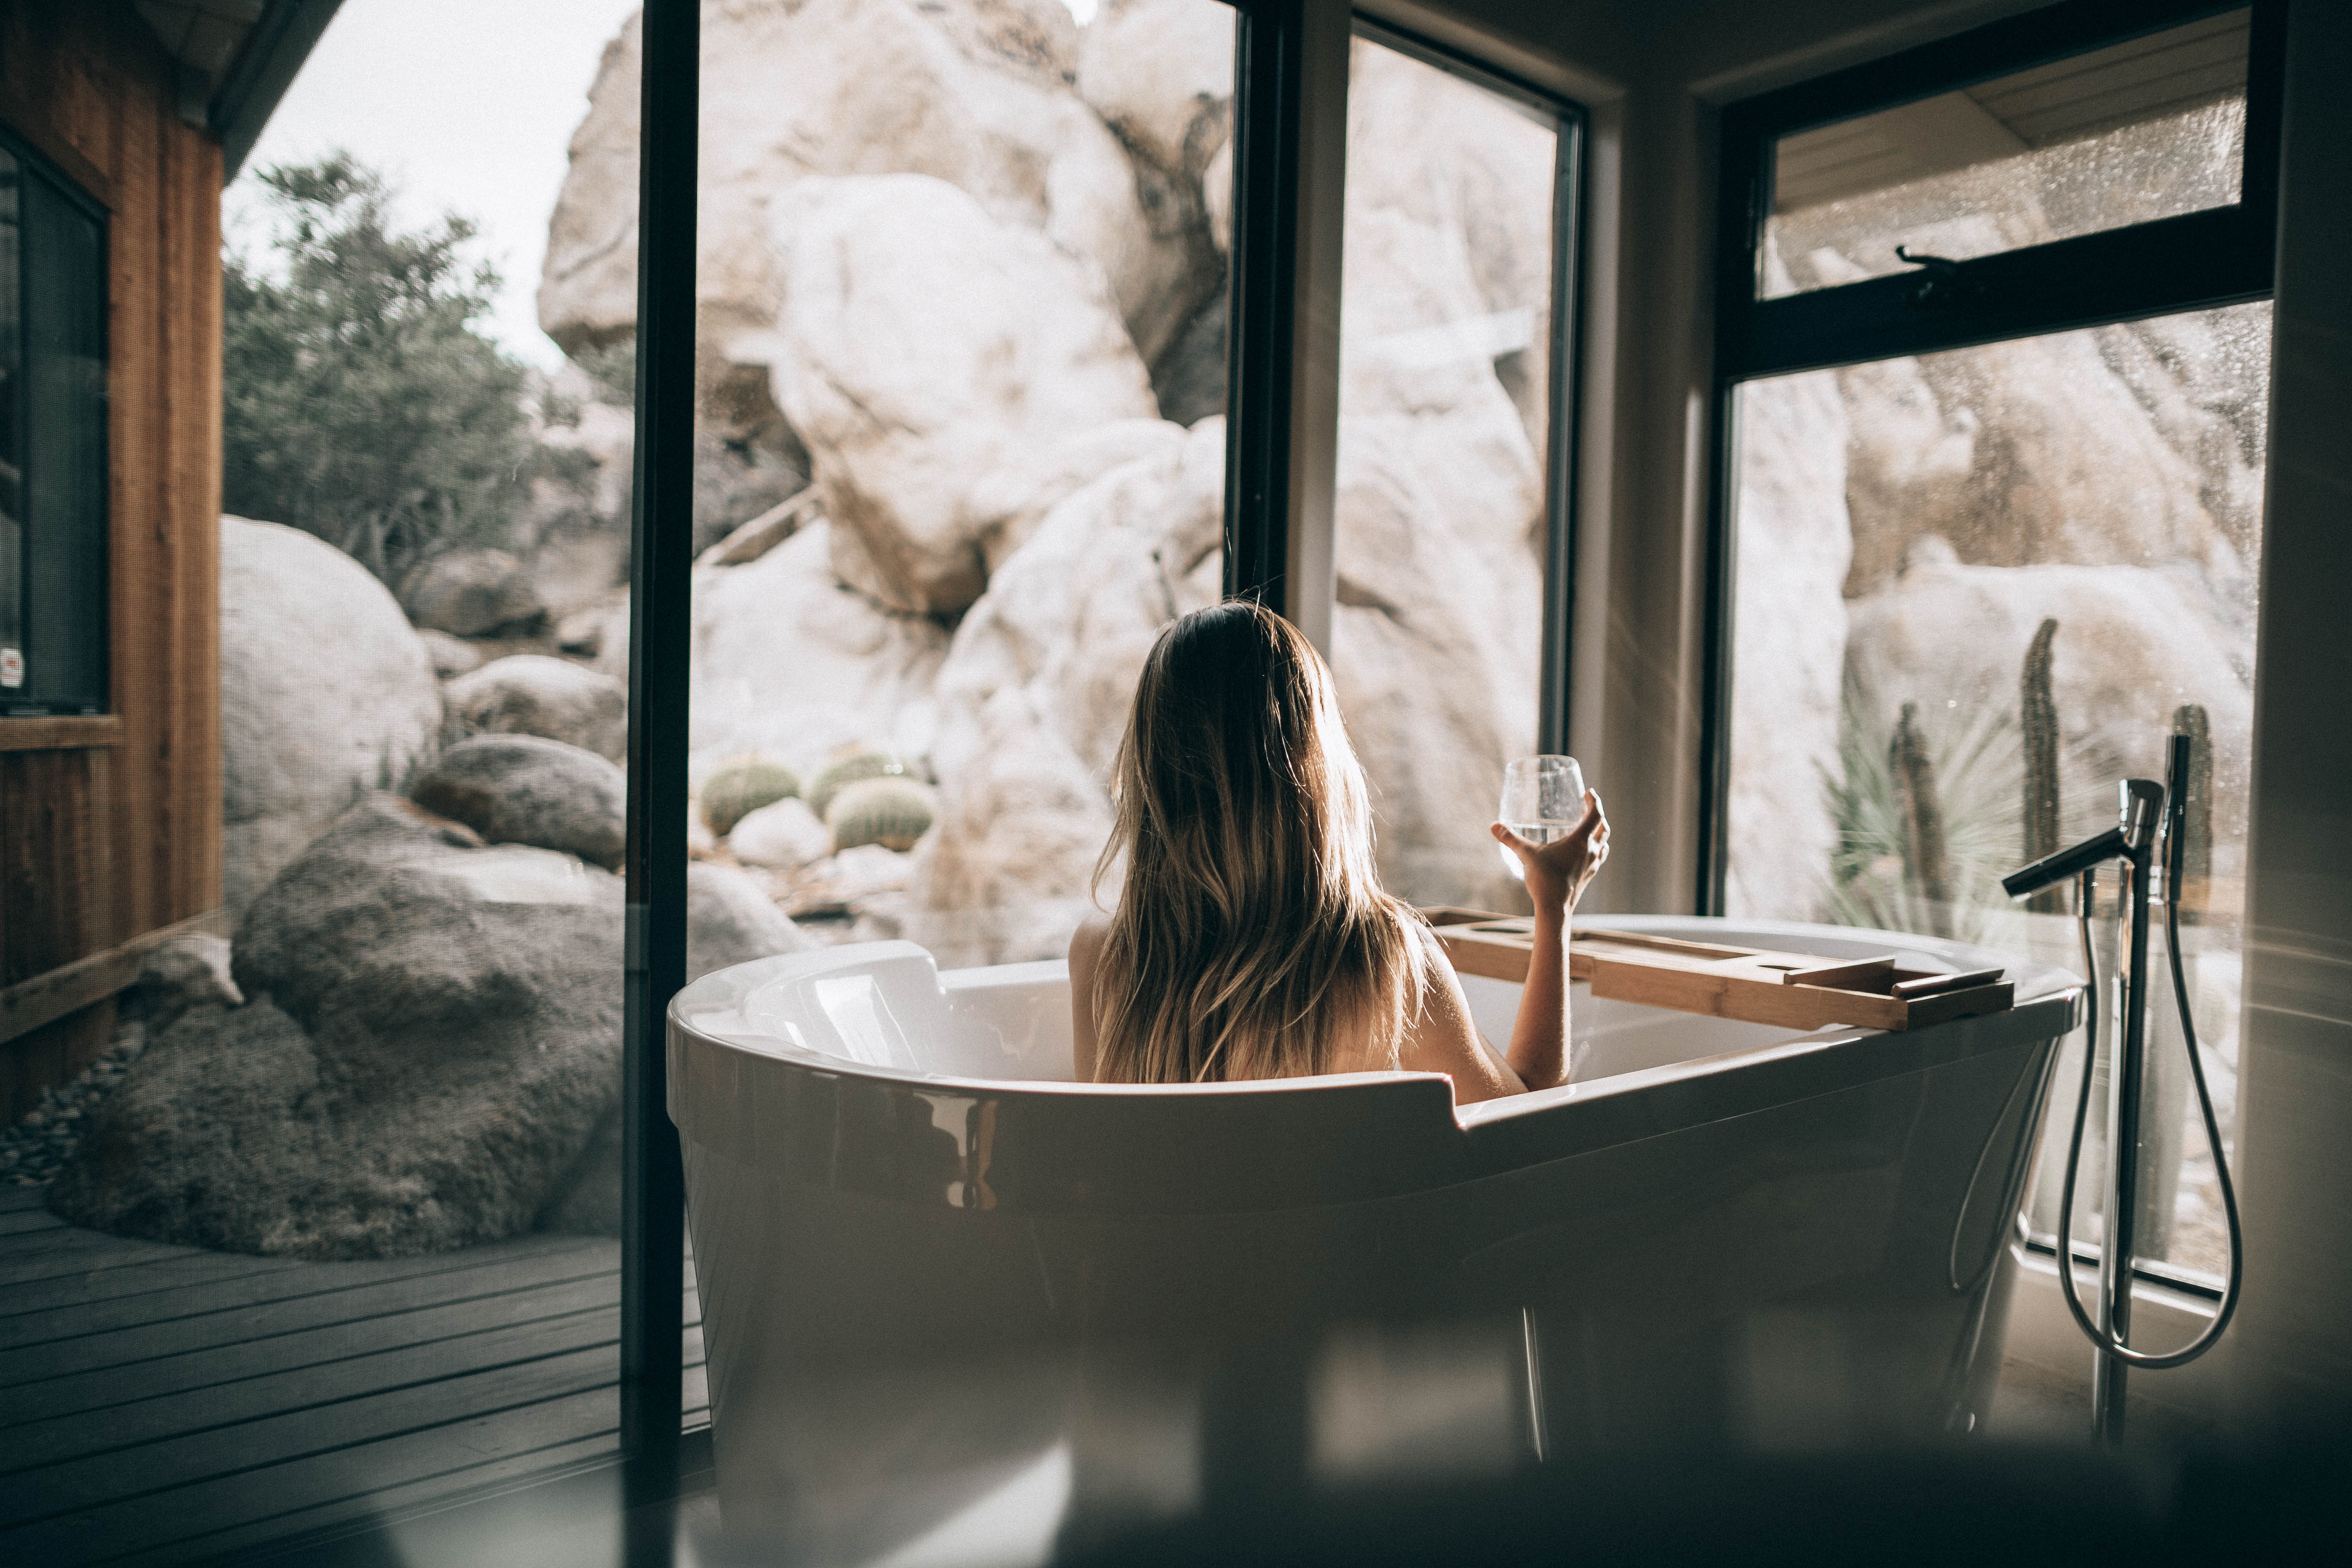 Woman Relaxing In a Bath with Glass of Wine 